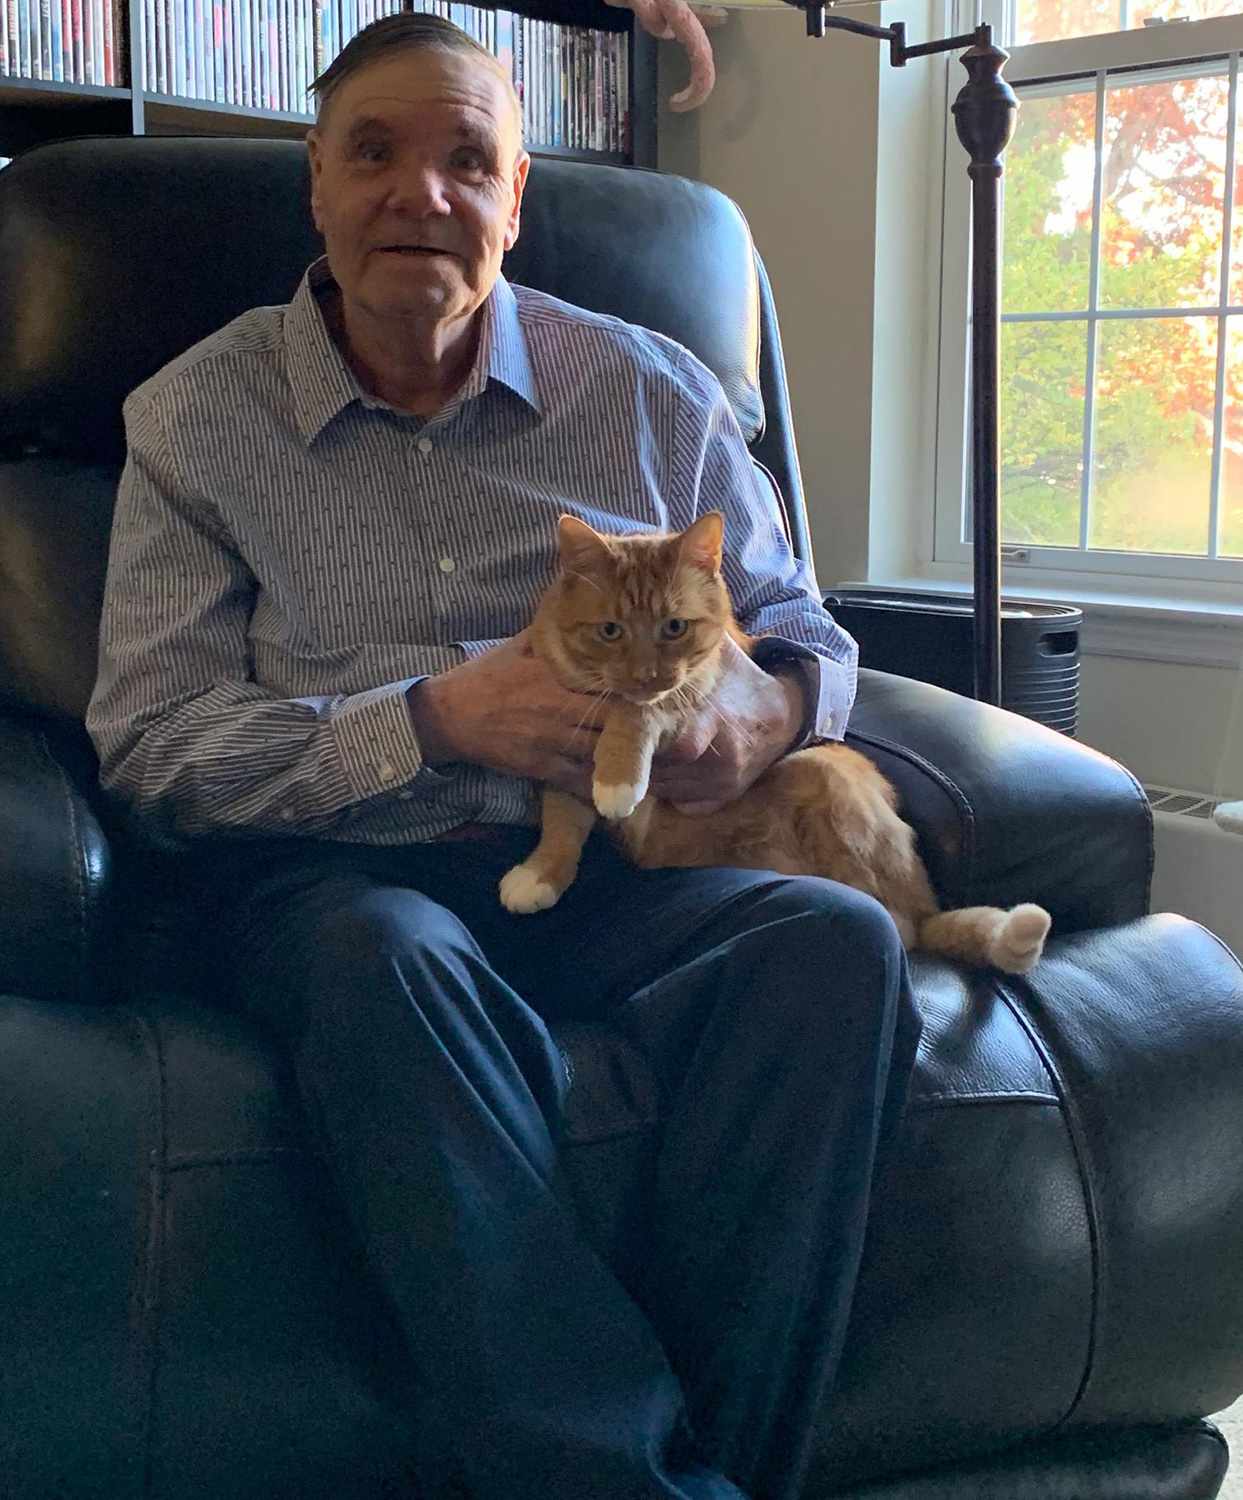 Retirement Community Helps Grieving Resident Adopt the Perfect Feline: 'It Beats Living Alone'